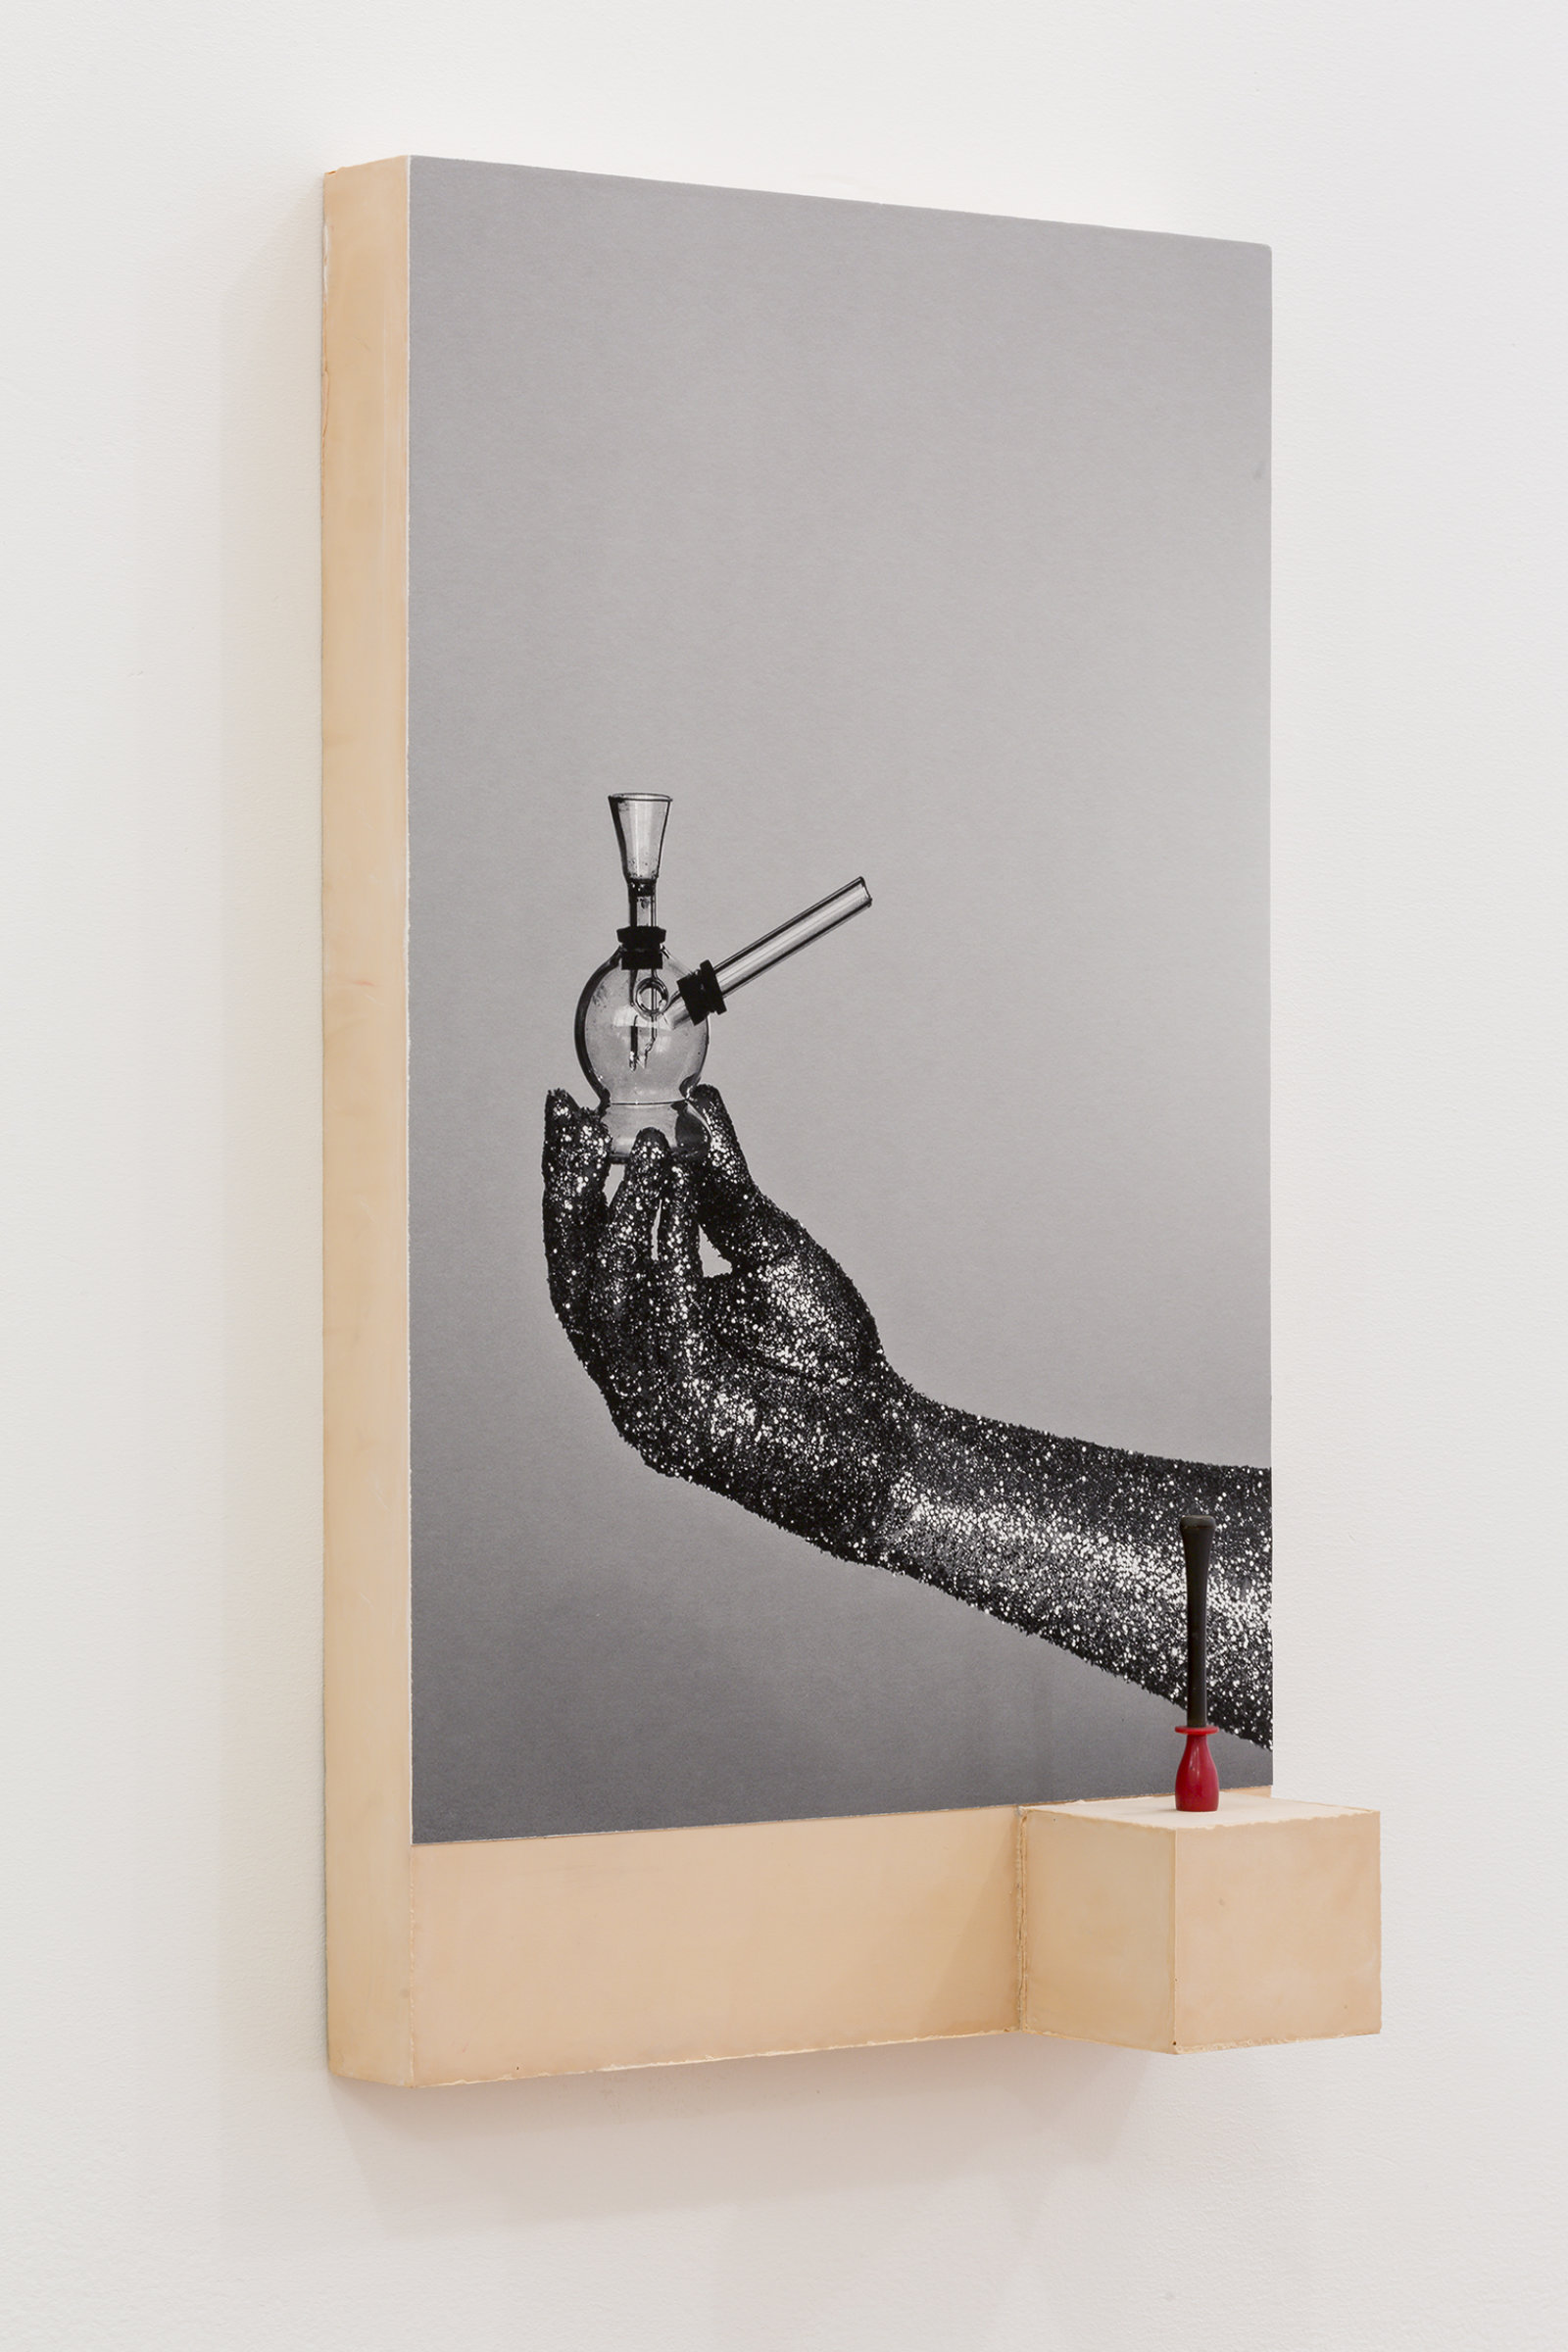 Valérie Blass, Vices - épater, 2014, photographic print on plaster base, pipe, pigment, 22 x 13 x 4 in. (55 x 32 x 10 cm)